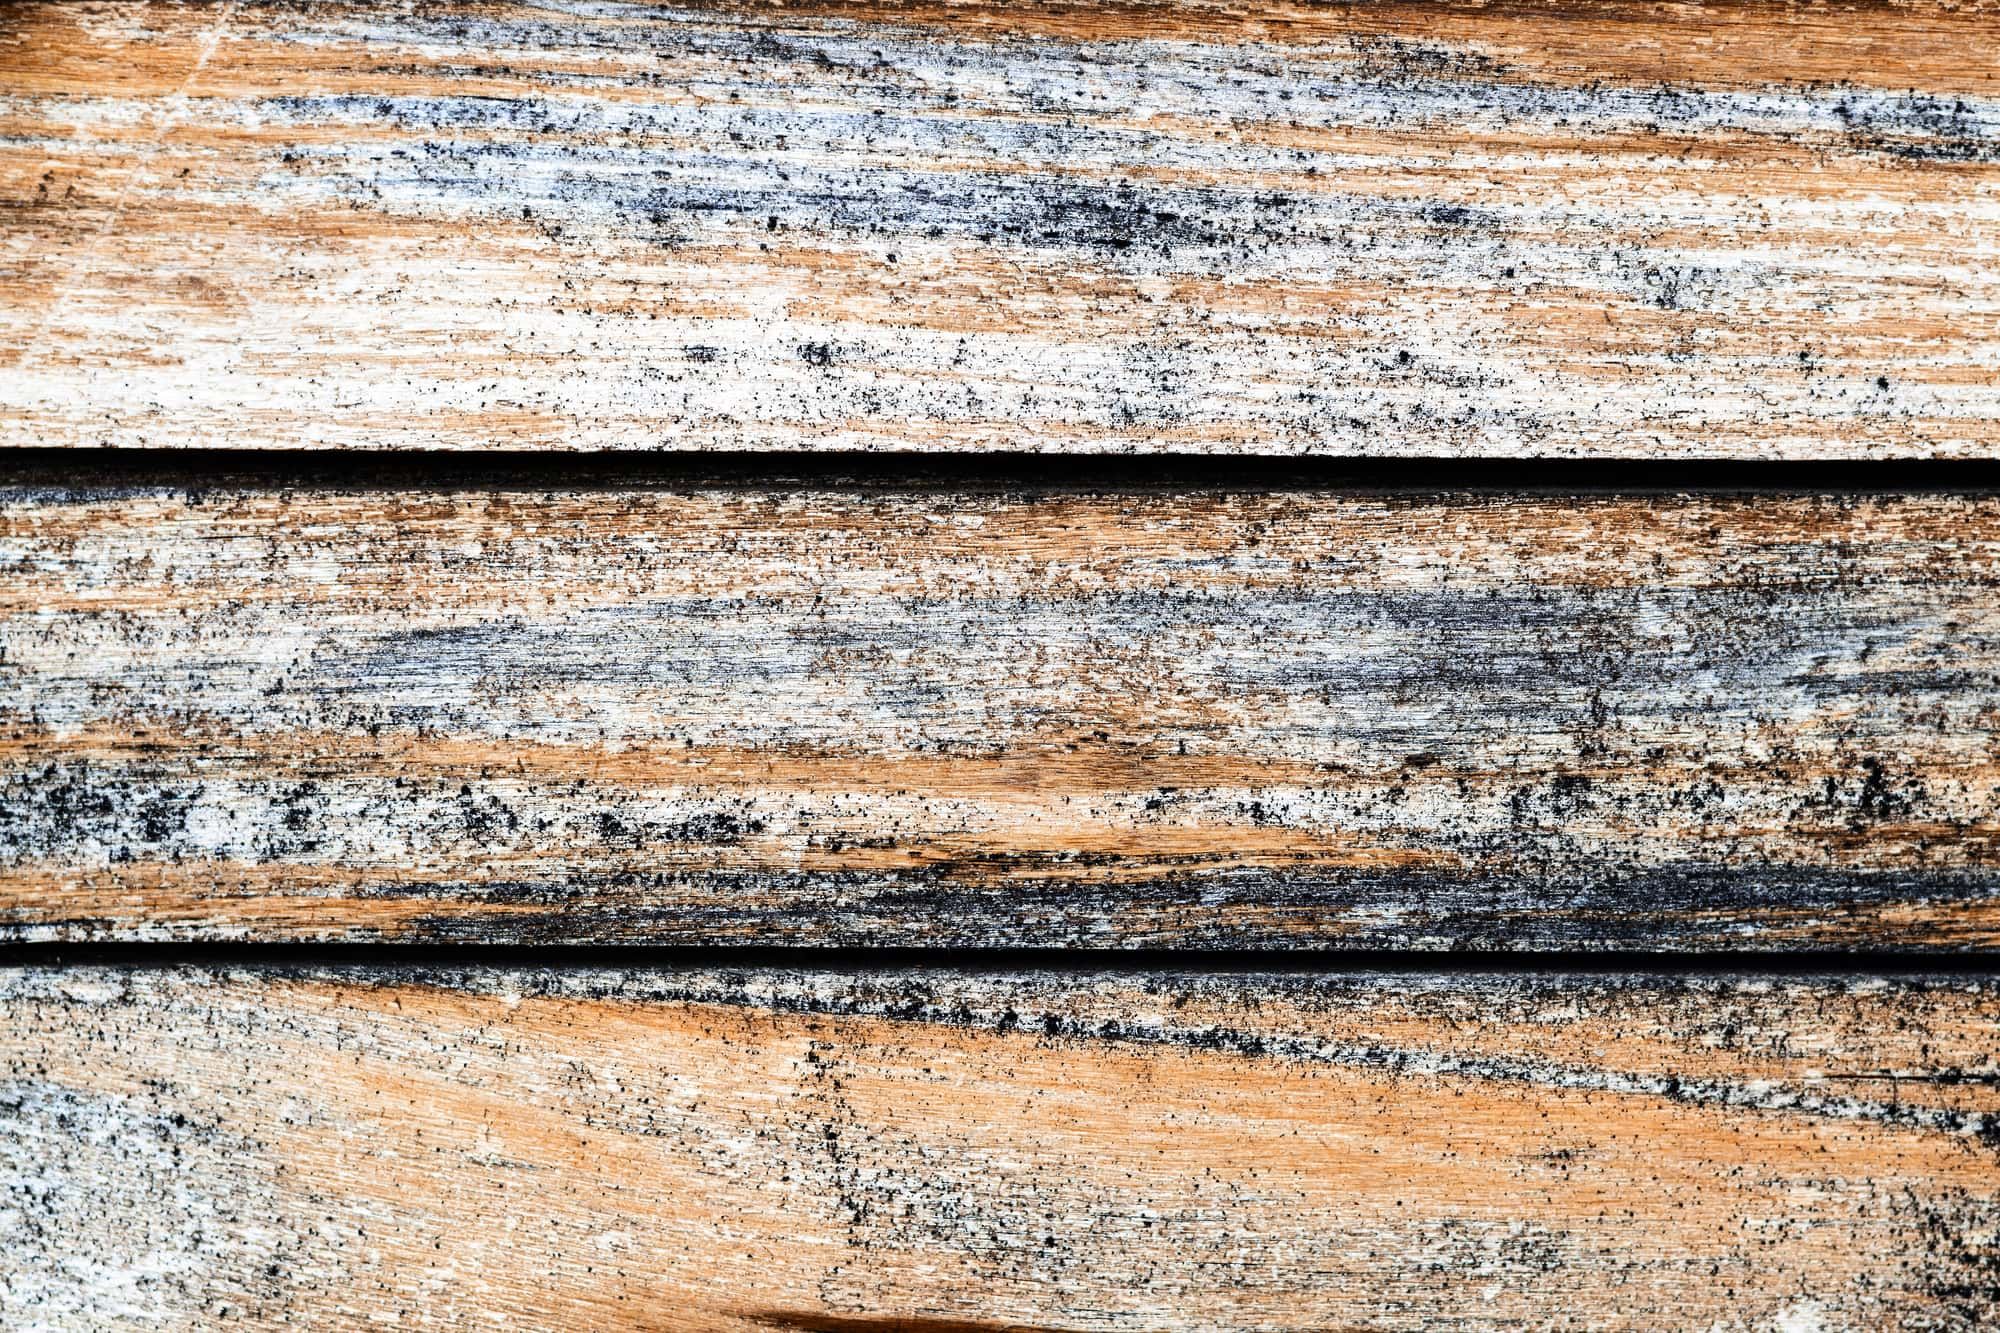 Weathered old striped texture of wooden boards-a natural background pattern of treated wood